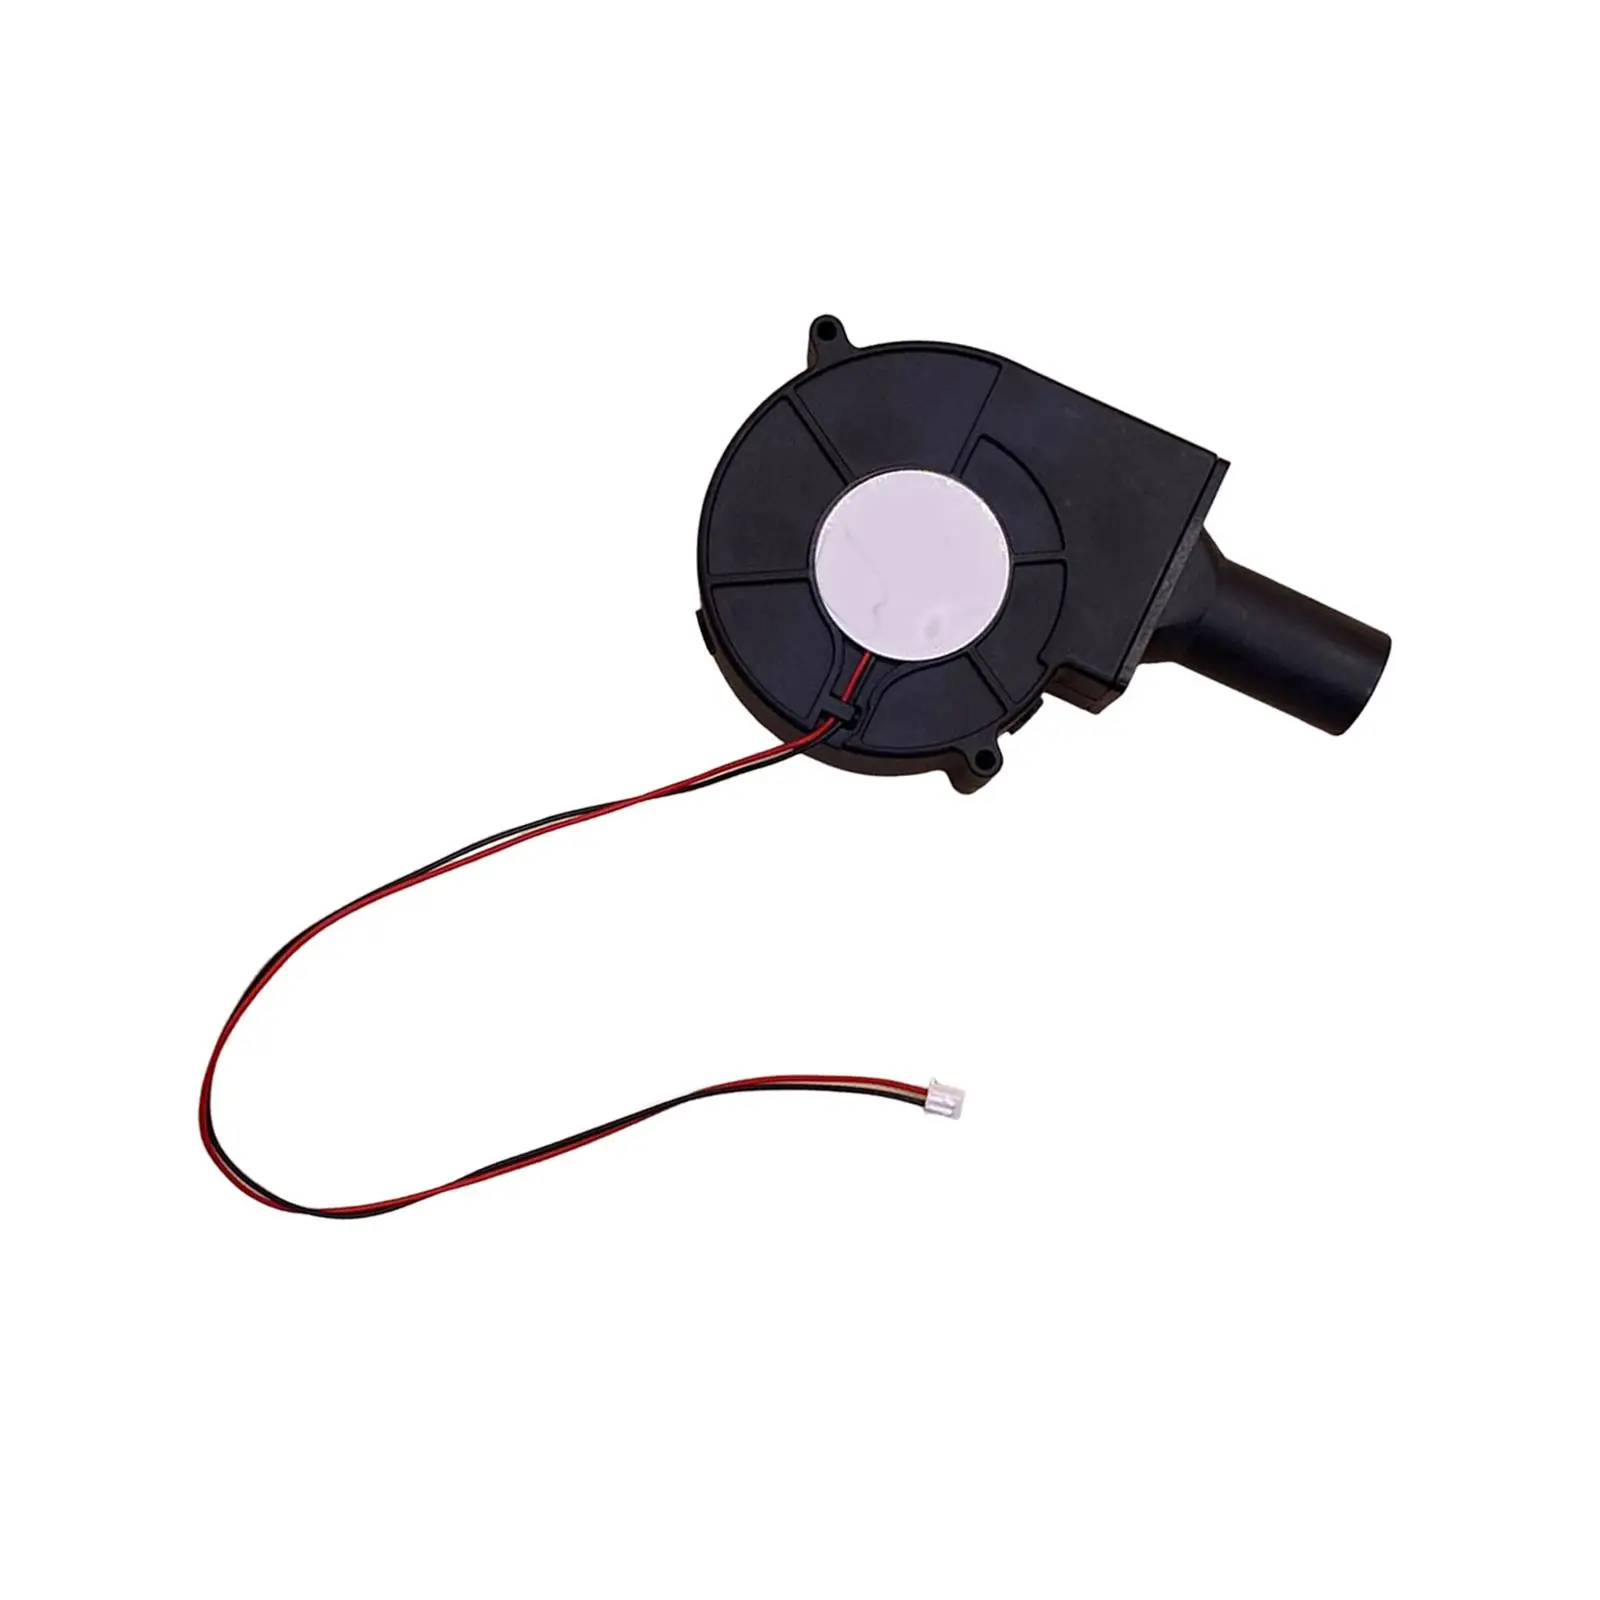 BBQ Blower Fan Grills air Blower Connector Connect Lightweight 5V Fire fan for Camping Picnic Cooking Accessories